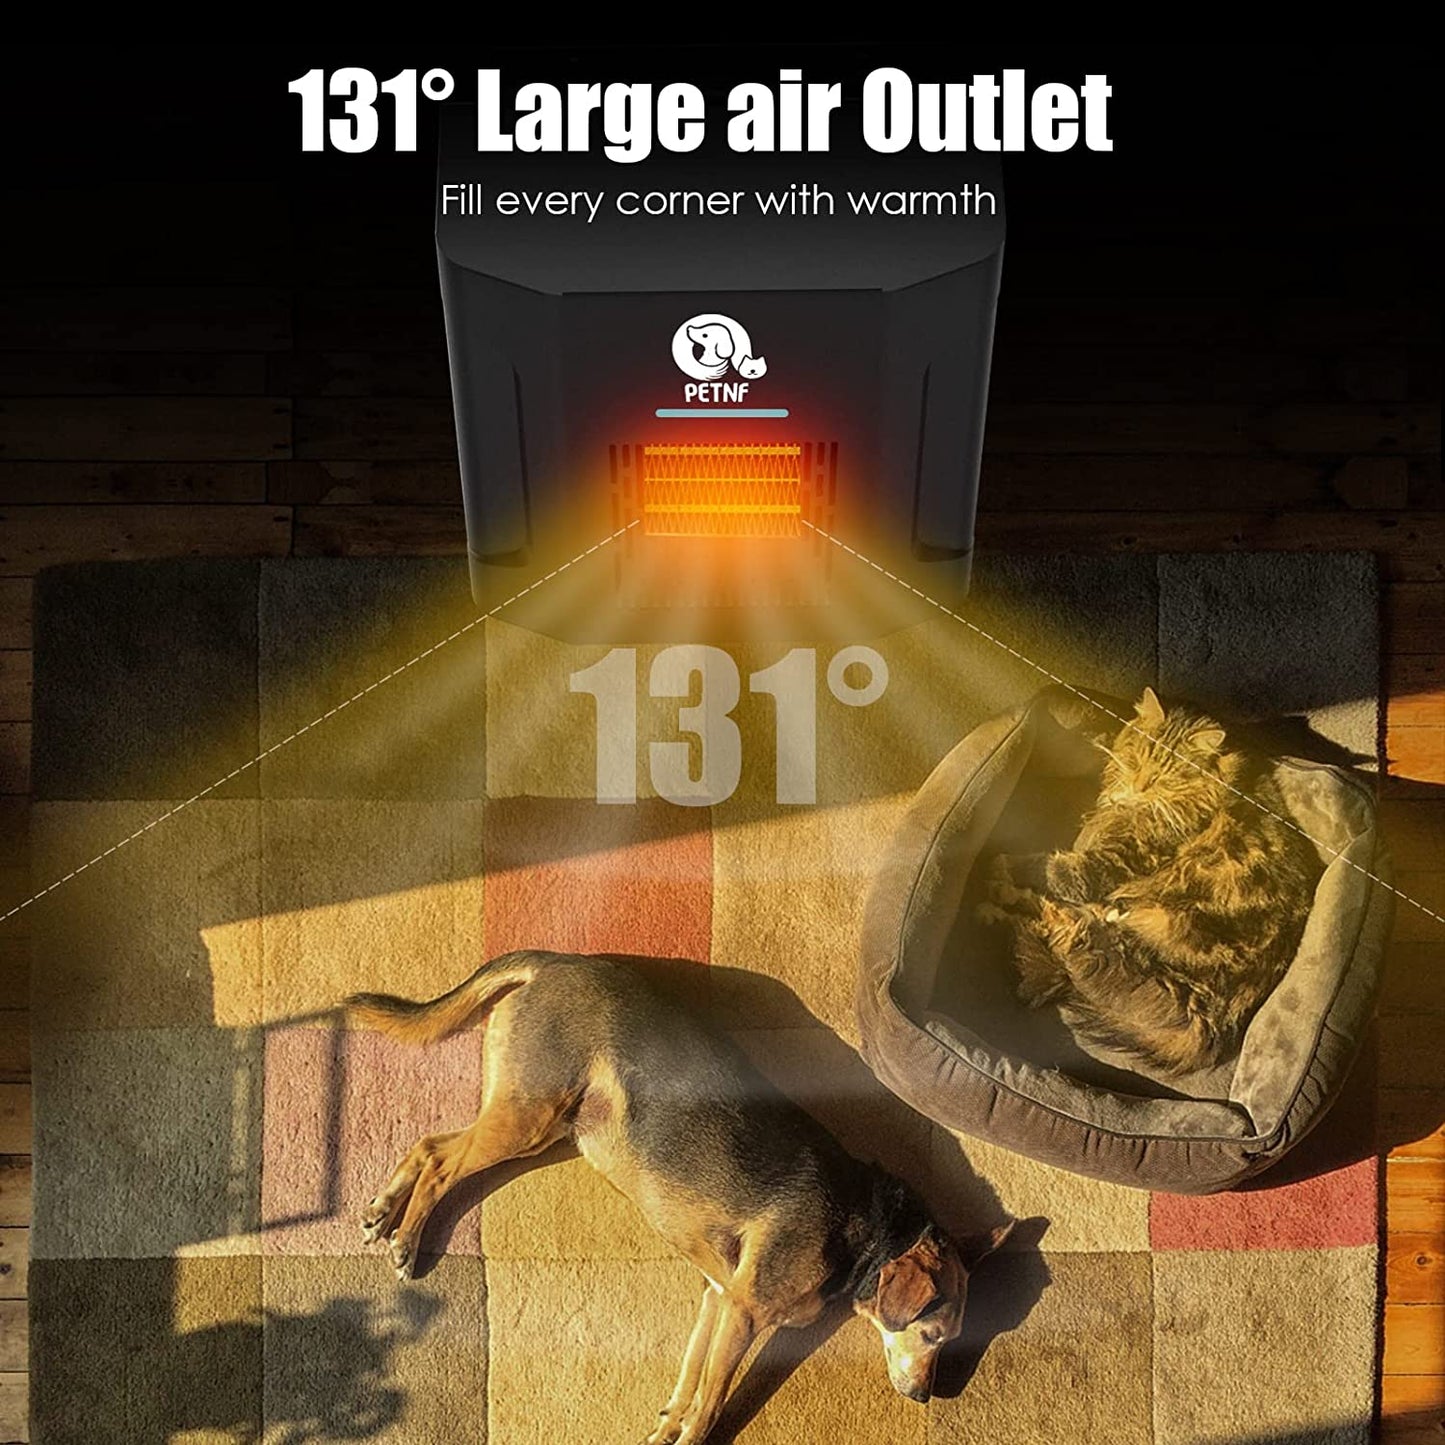 Dog House Heater, Pet House Heater with Thermostat,